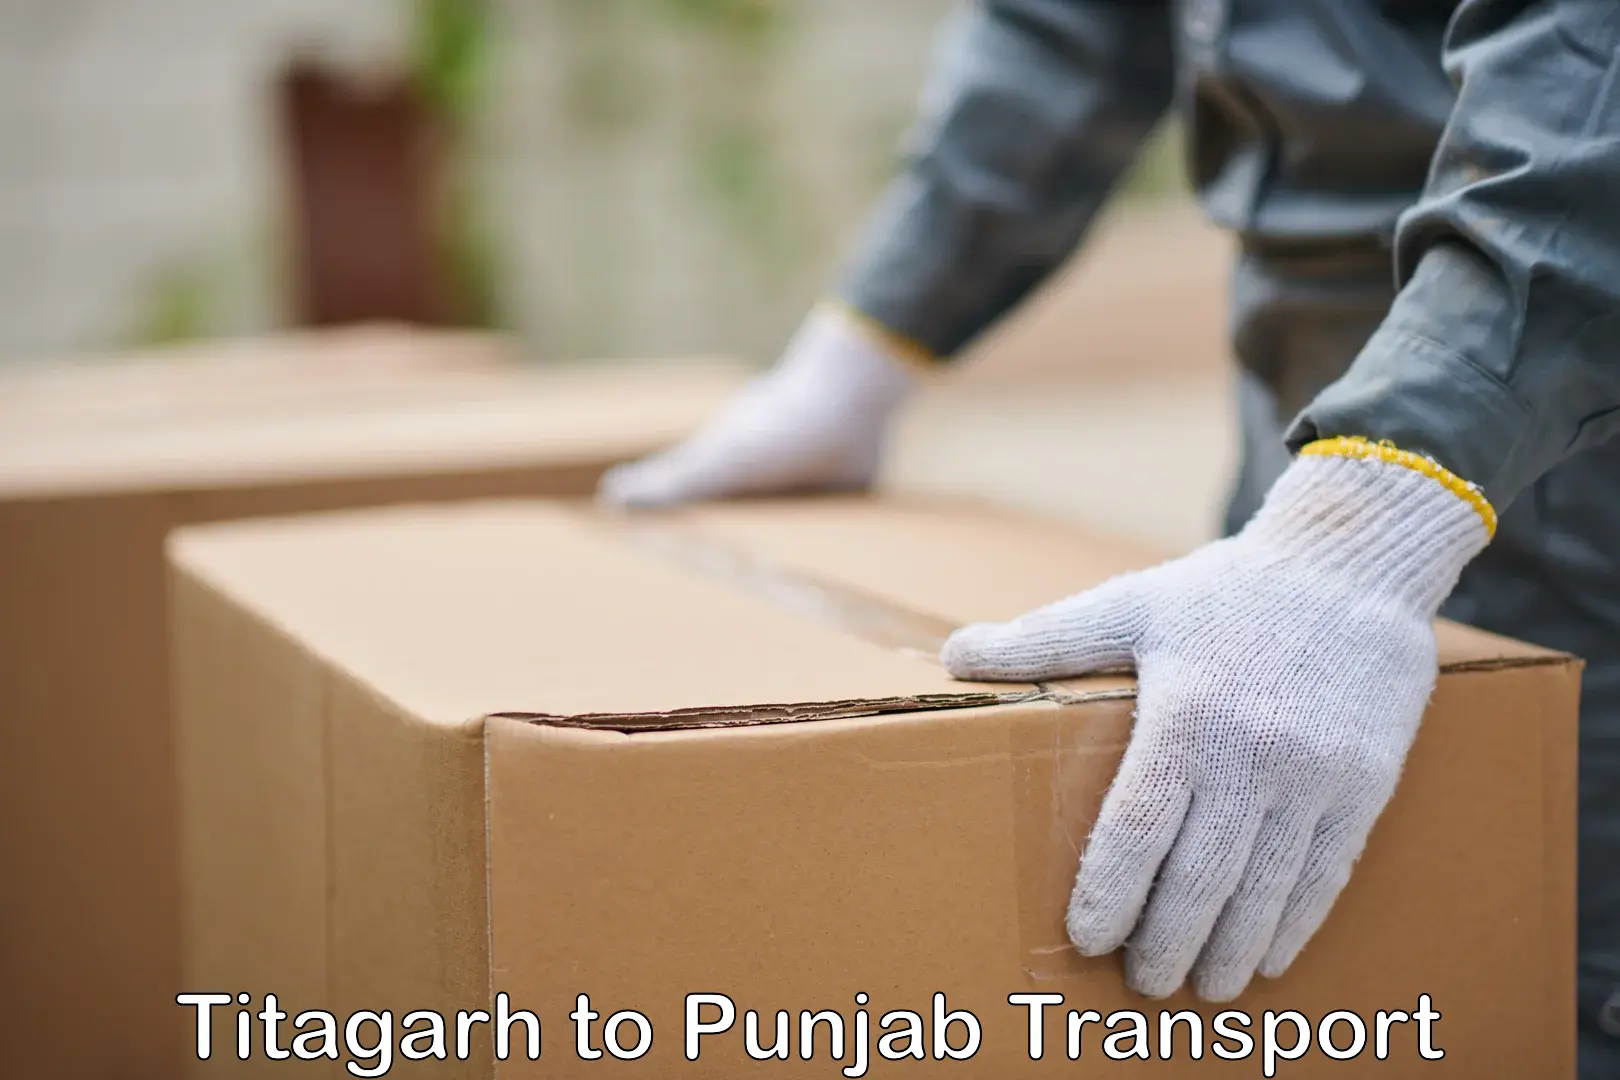 Container transport service Titagarh to Khanna